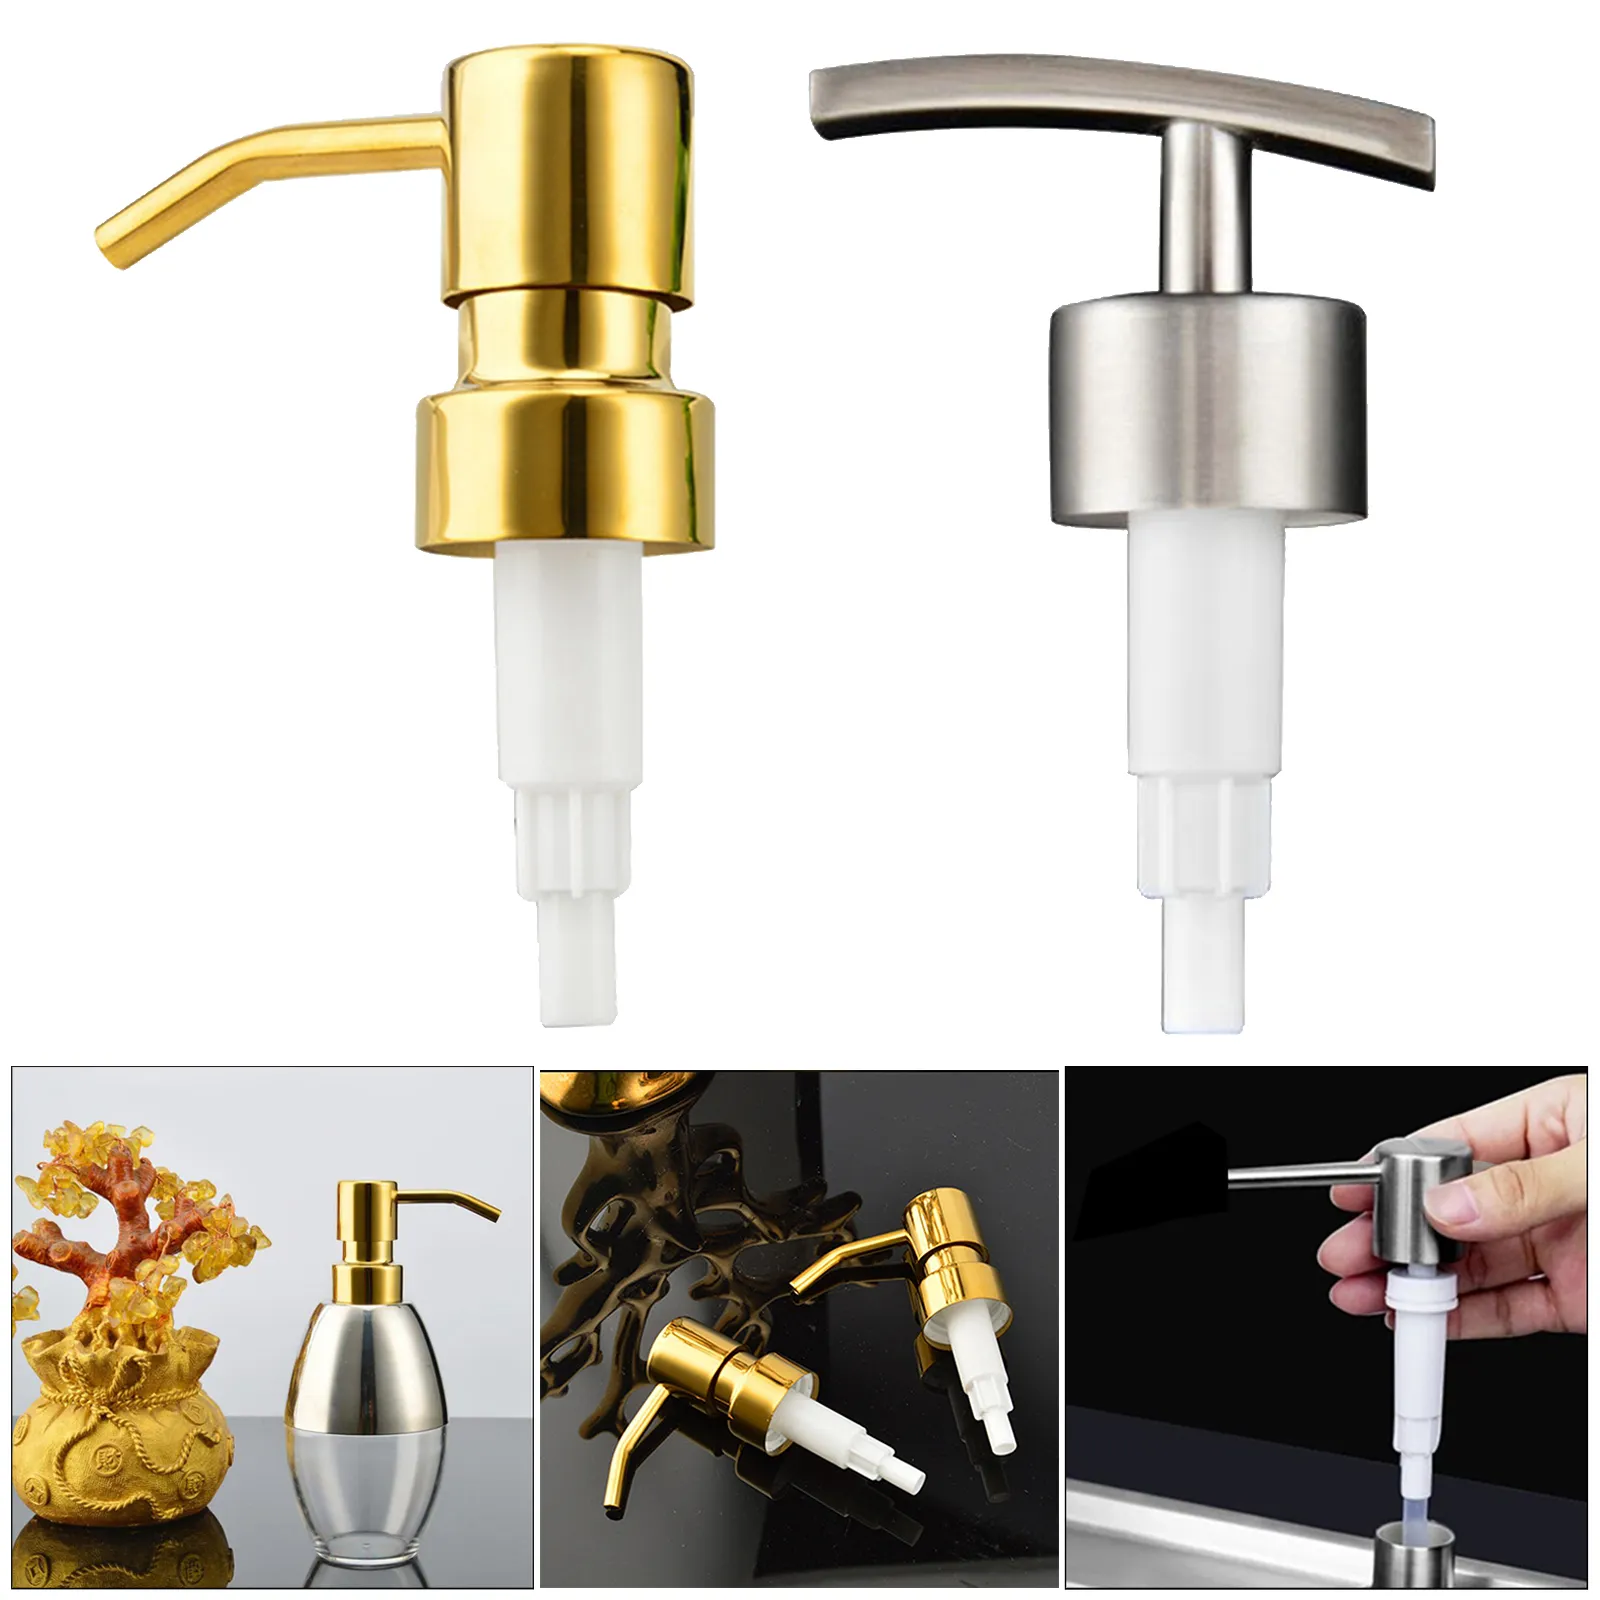 Durable 304 Rust Proof Stainless Steel Soap Pump, Kitchen Soap Dispenser Pump Replacement for Regular Mouth Bottle